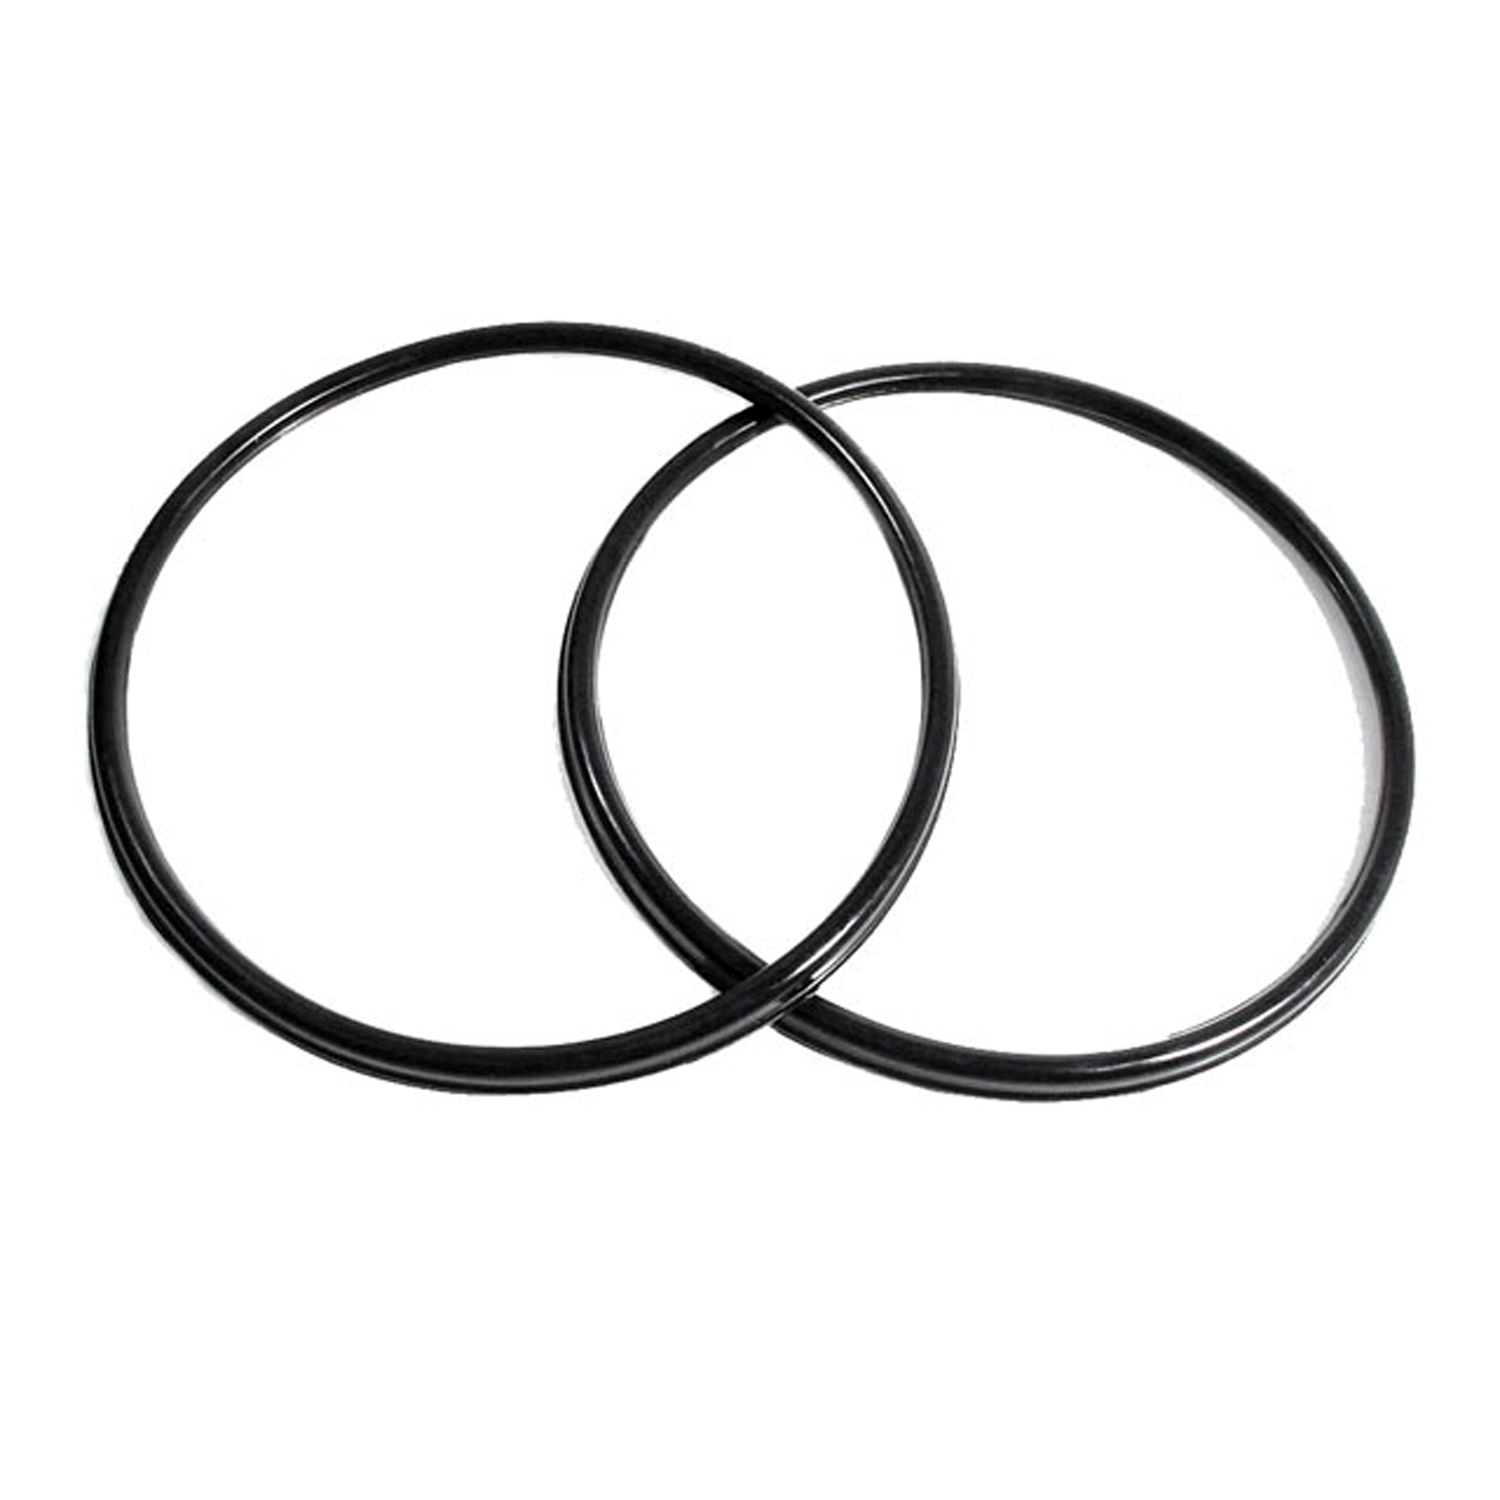 1955 Buick Special Trim Ring Lens Seal.  7-1/2 O.D., 6-7/8 I.D.  Pair-HR 6